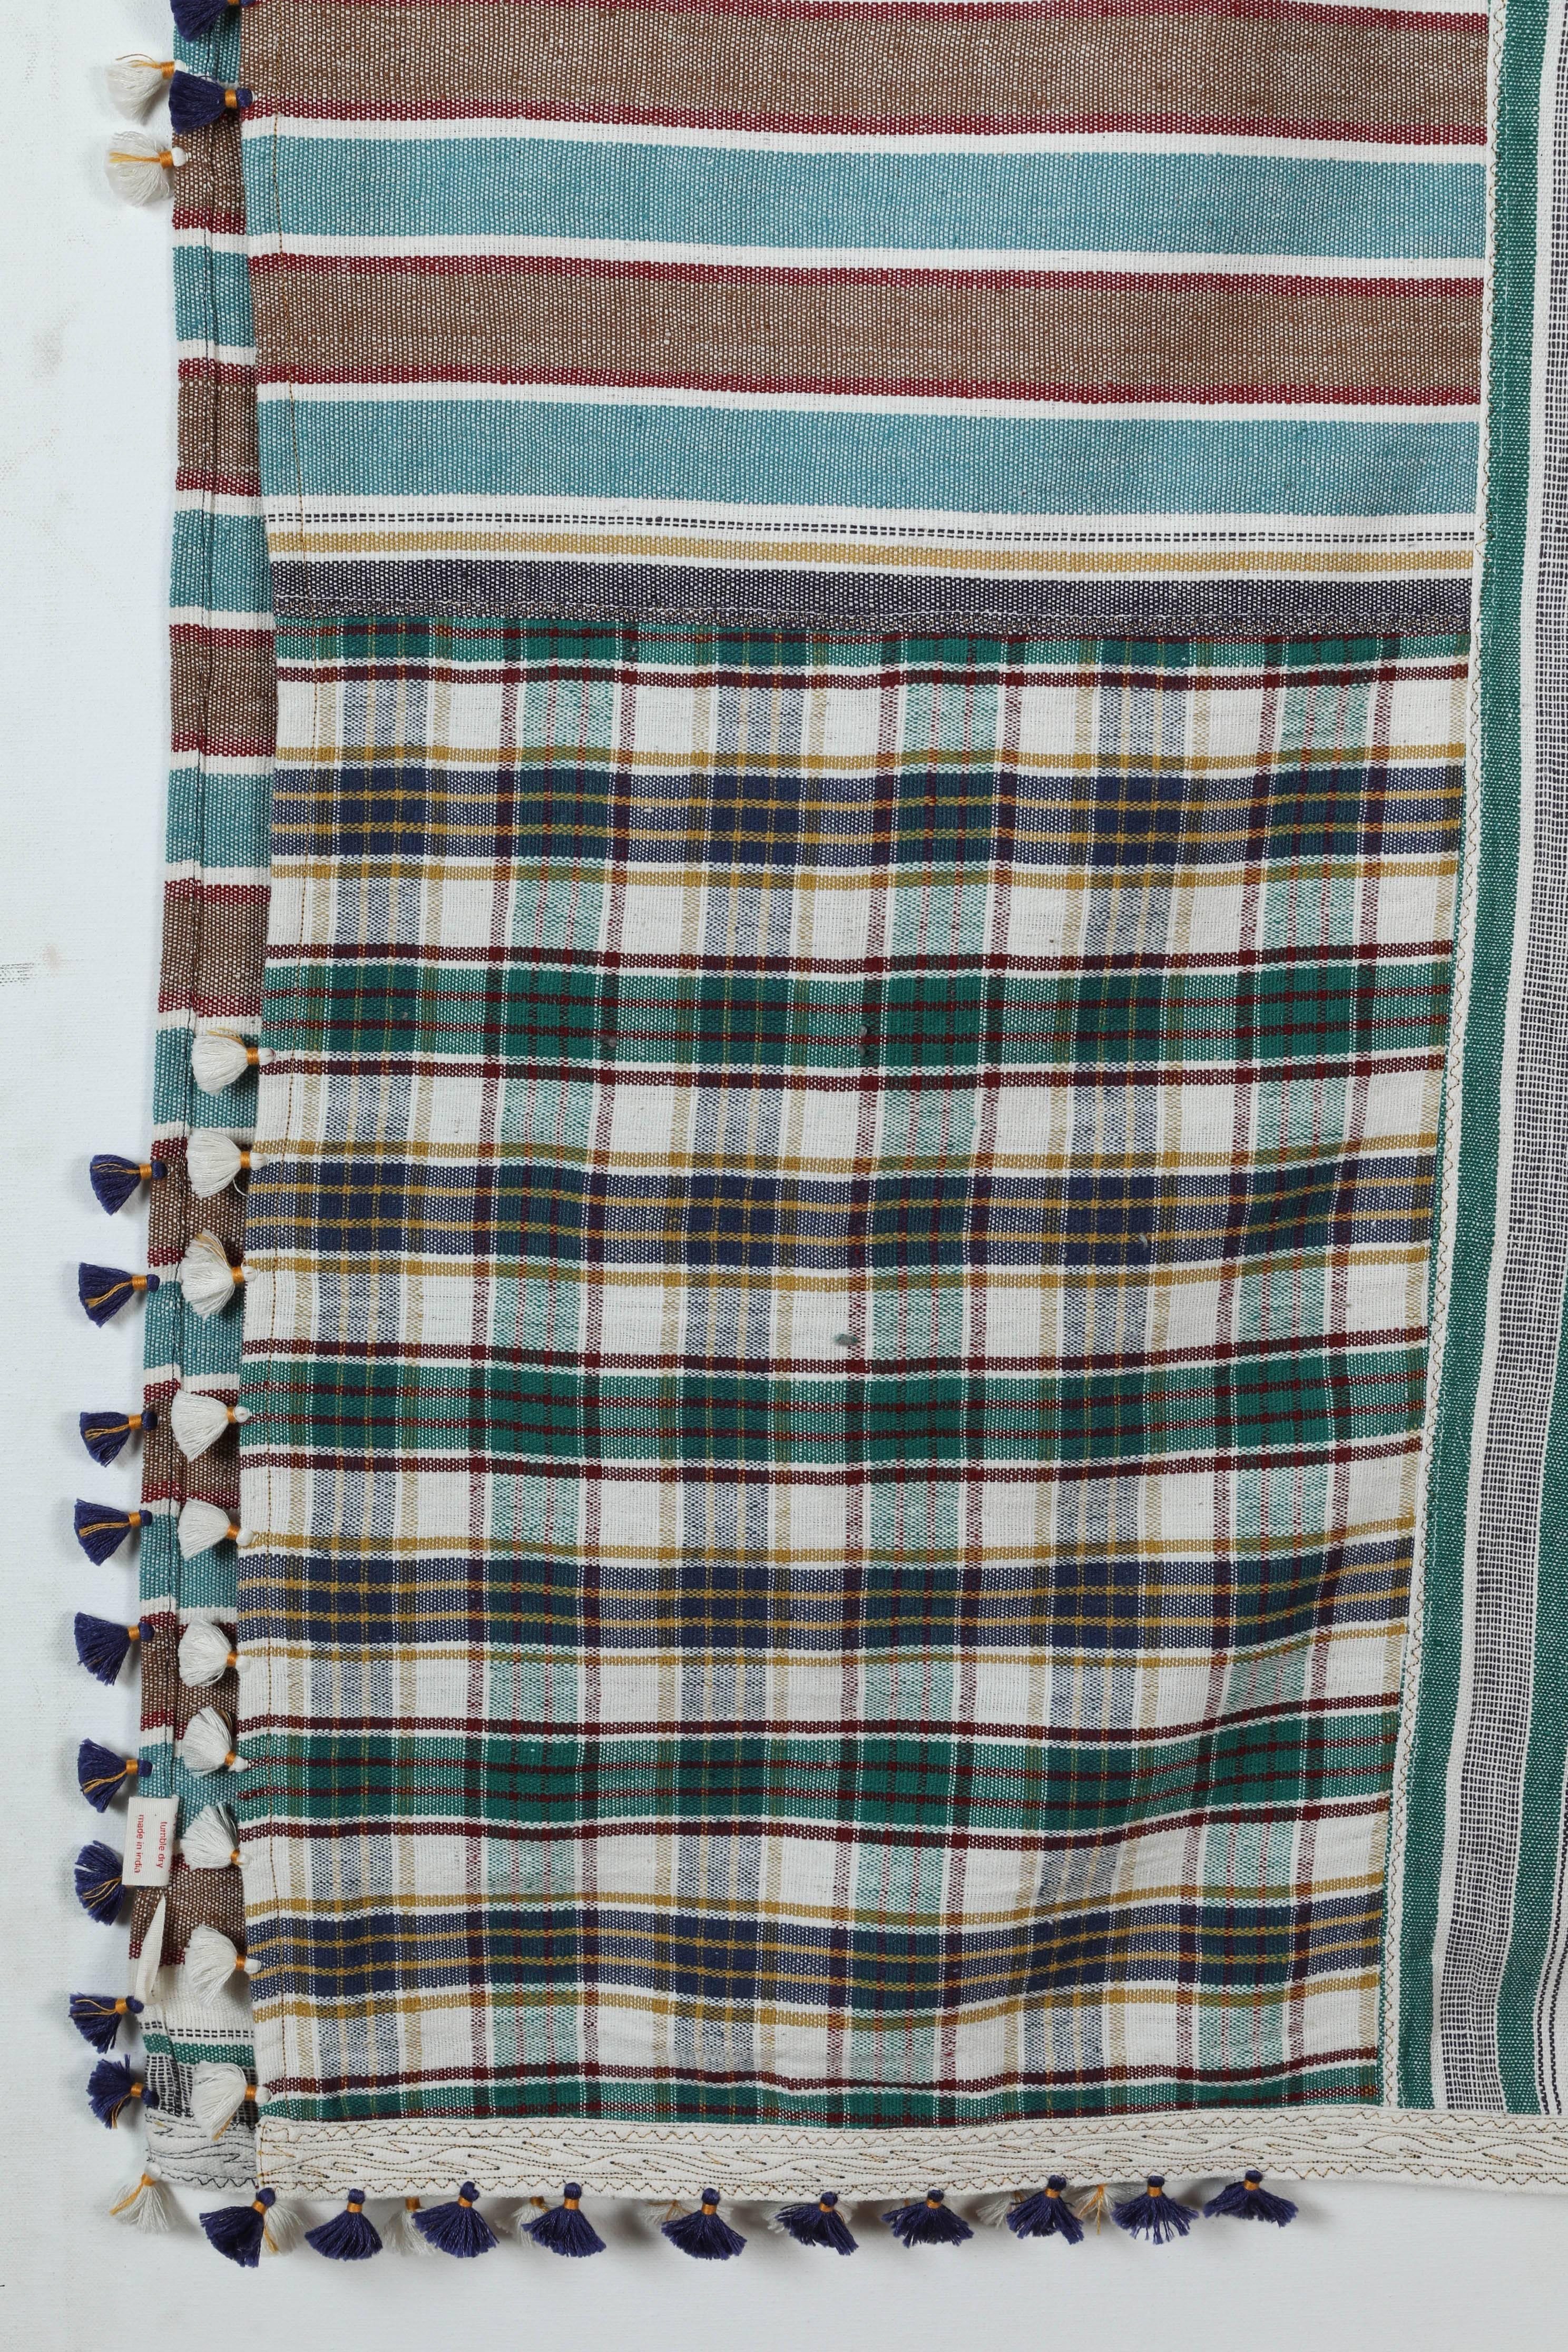 Kala naturally dyed organic cotton from Gujarat, India. Hand-loomed using traditional Indian textile techniques to produce extra weft woven stripes and plaids. This green, turquoise blue, brown and ivory bedcover has added hand-knotted tassels.